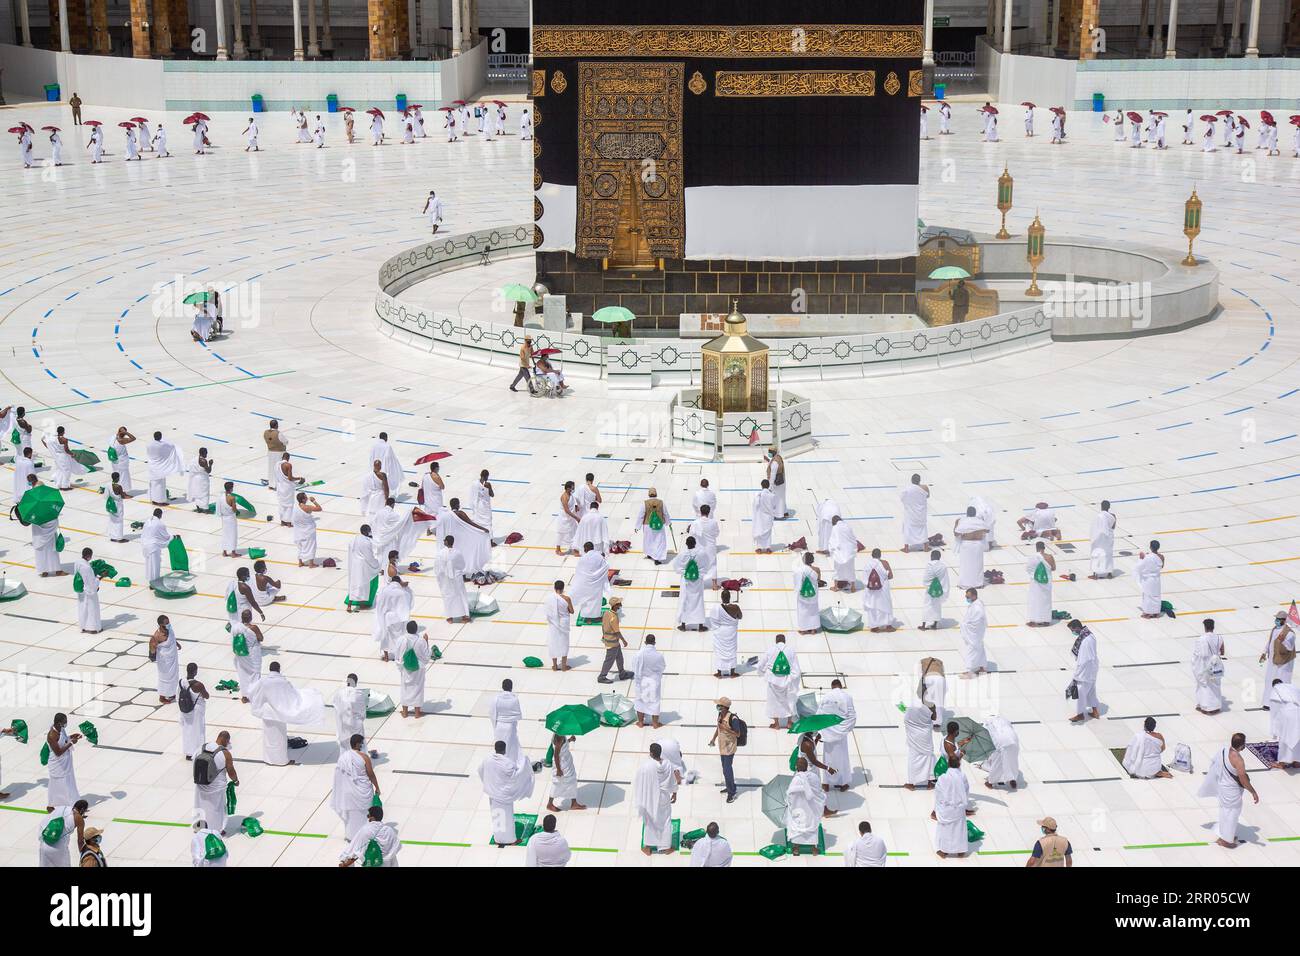 Bilder des Jahres 2020, News 07 Juli News Themen der Woche KW31 News Bilder des Tages 200729 -- MECCA, July 29, 2020 Xinhua -- Pilgrims circumambulate the sacred site Kaaba in the Grand Mosque in Mecca, Saudi Arabia on July 29, 2020. Muslim pilgrims on Wednesday embarked on the first day of their Hajj rituals in the holy city of Mecca, Saudi Arabia, according to a statement by Saudi ministry of media. The pilgrims started the major Islamic pilgrimage after finishing four days of hotel isolation in Mecca and prior to that a week-long quarantine at home, as part of the preventative measures to g Stock Photo